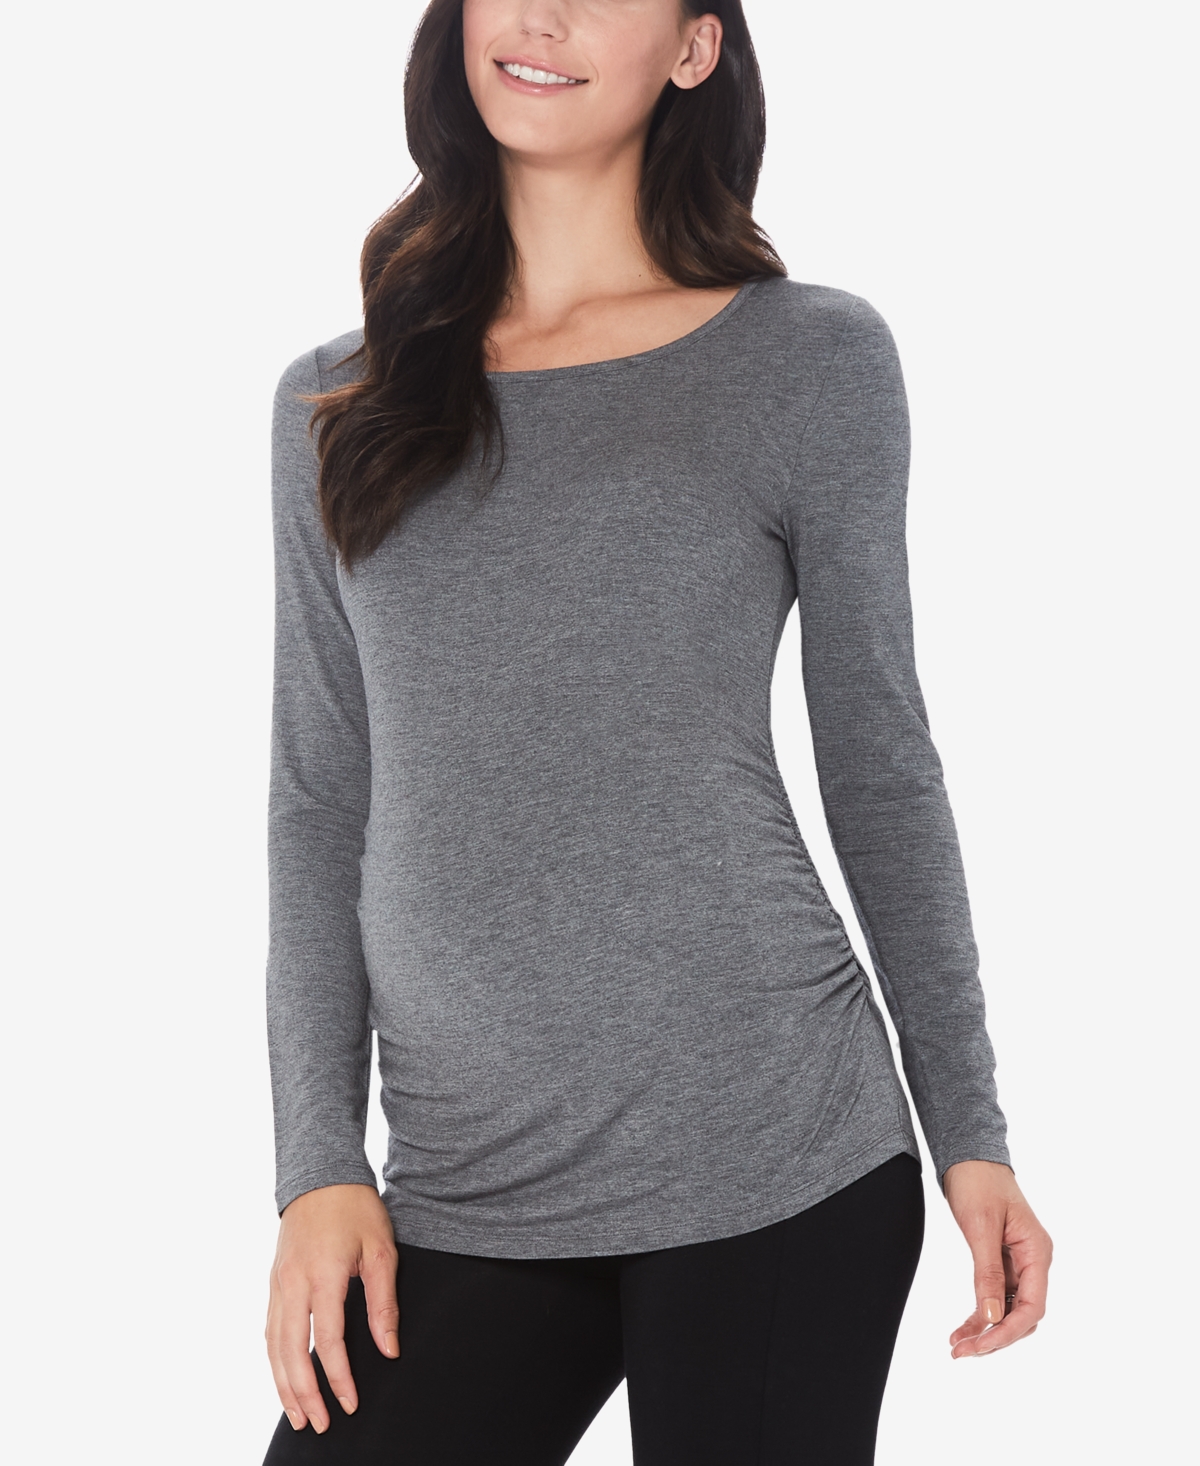 Cuddl Duds Women's Softwear with Stretch Maternity Long Sleeve Ballet Neck Top